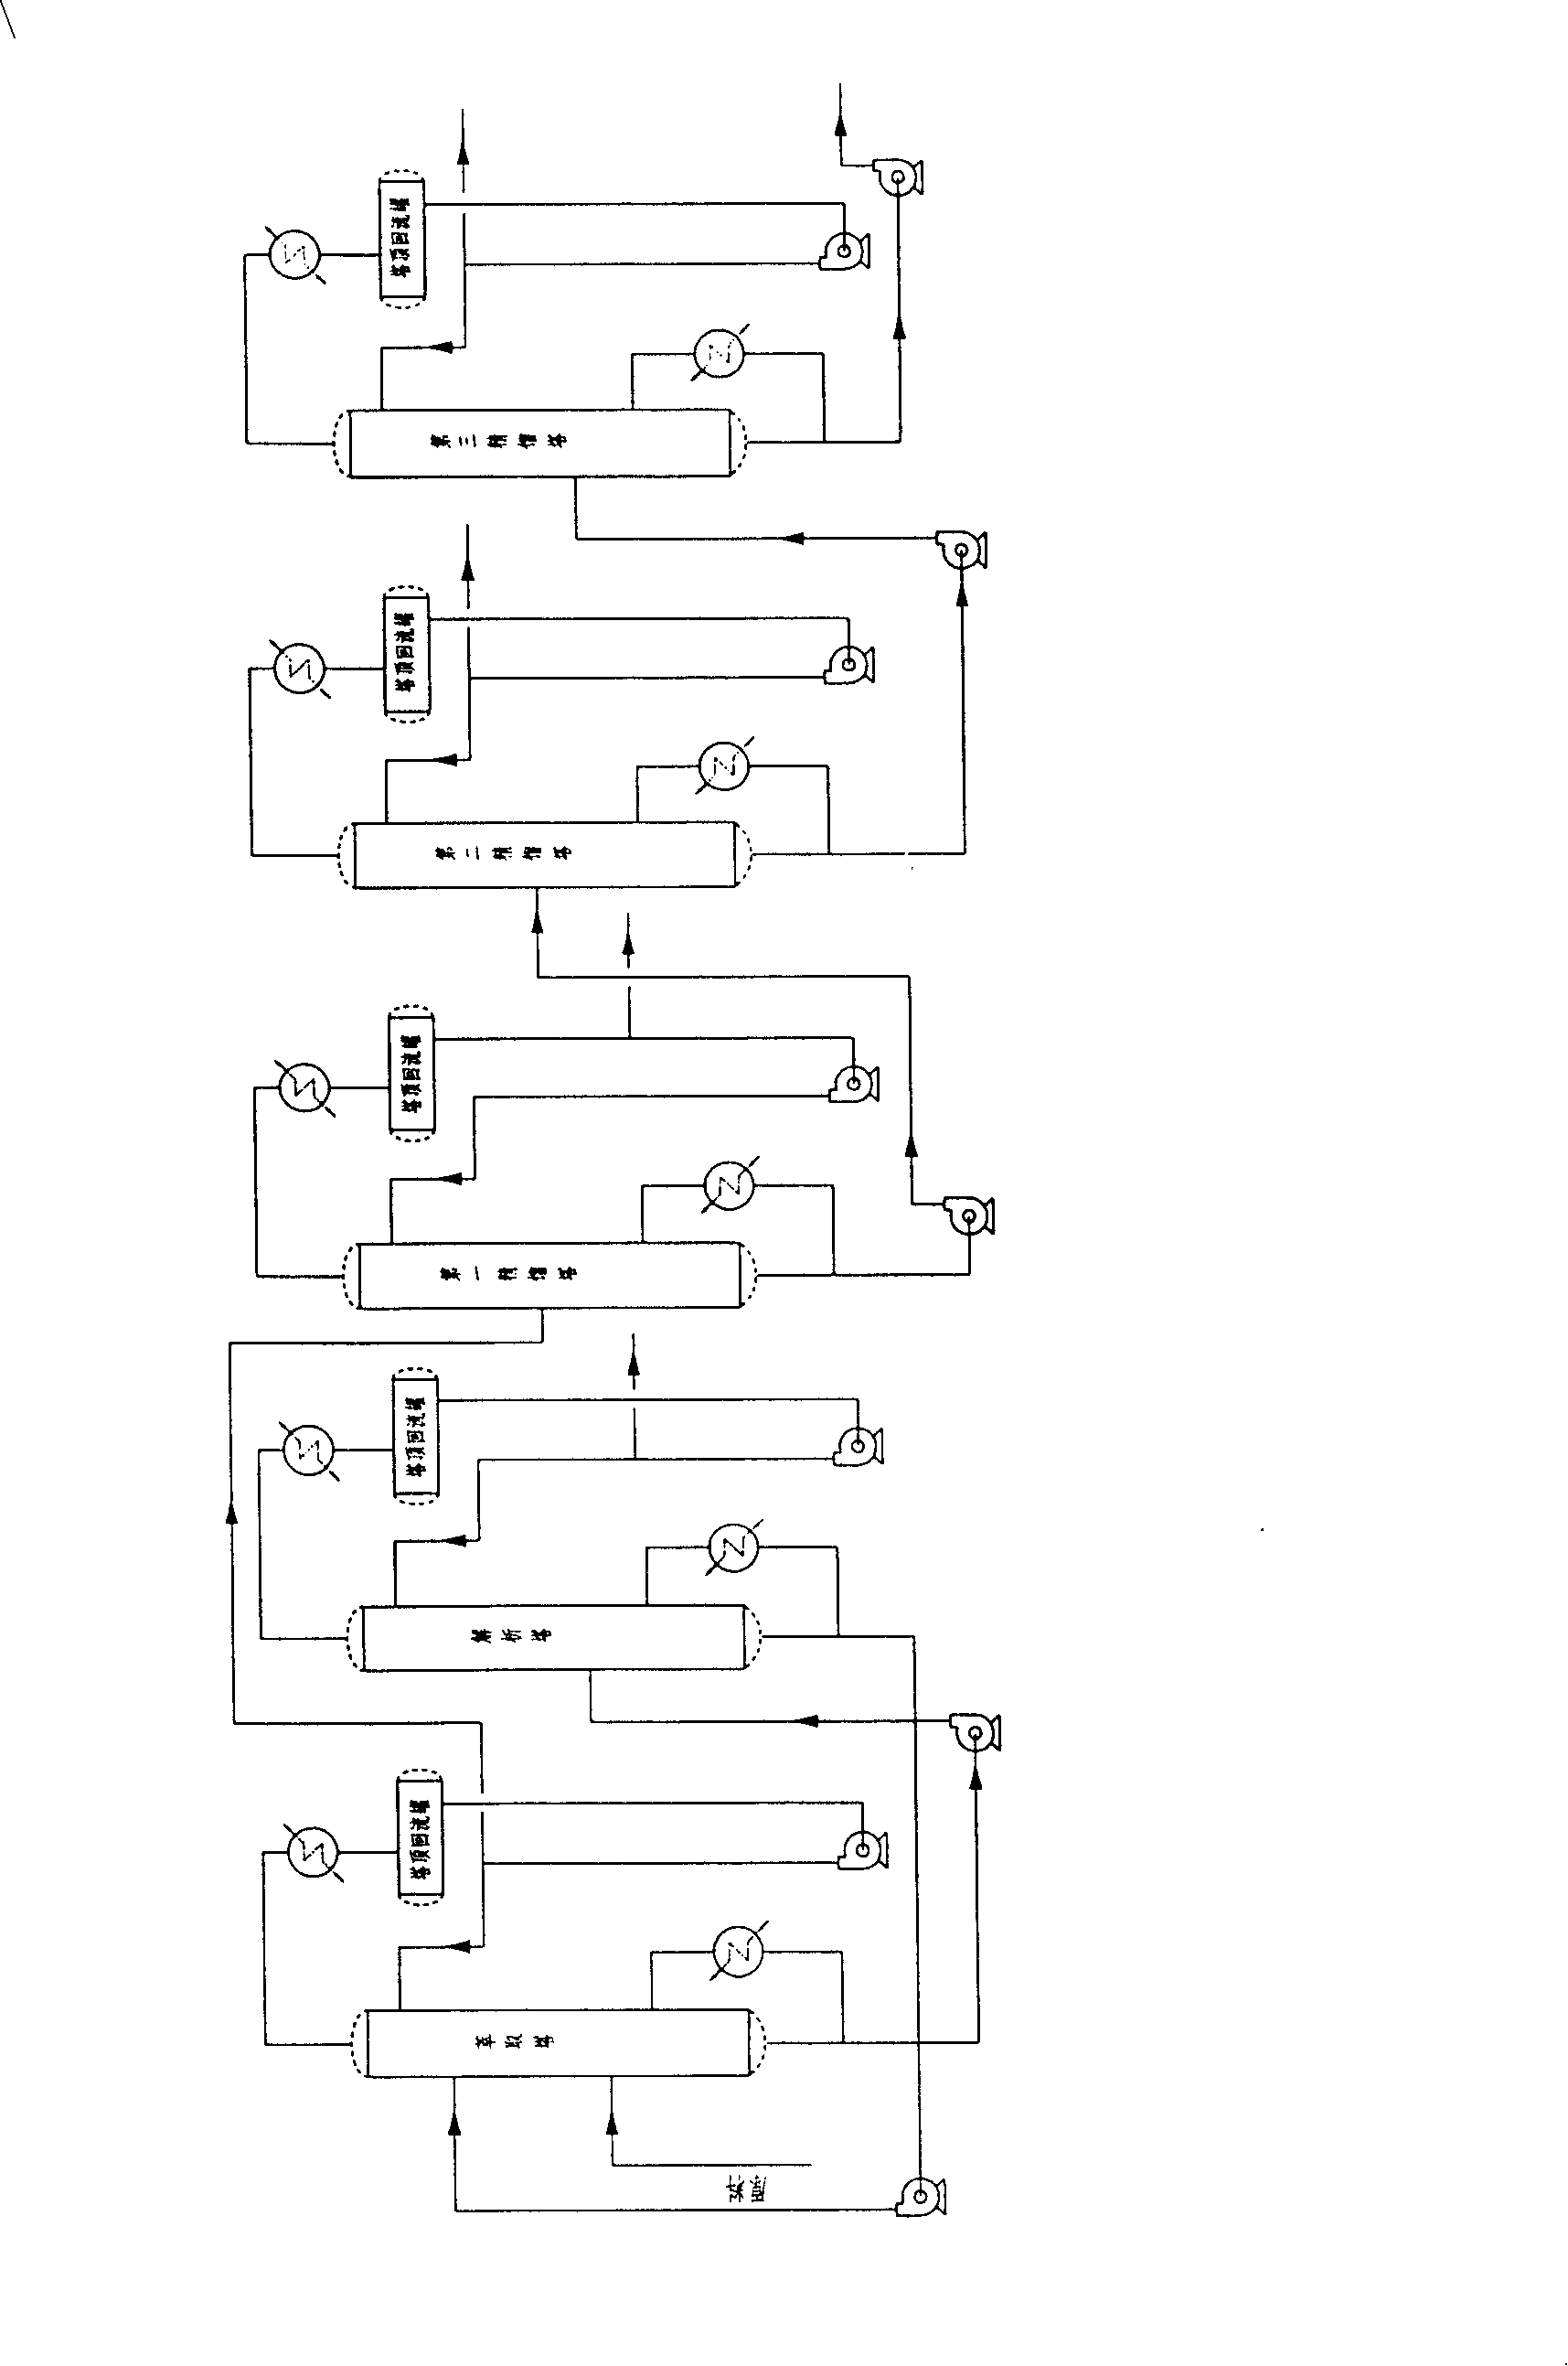 Method for producing high-purity cyclopentadiene and cyclopentane by coarse piperyene